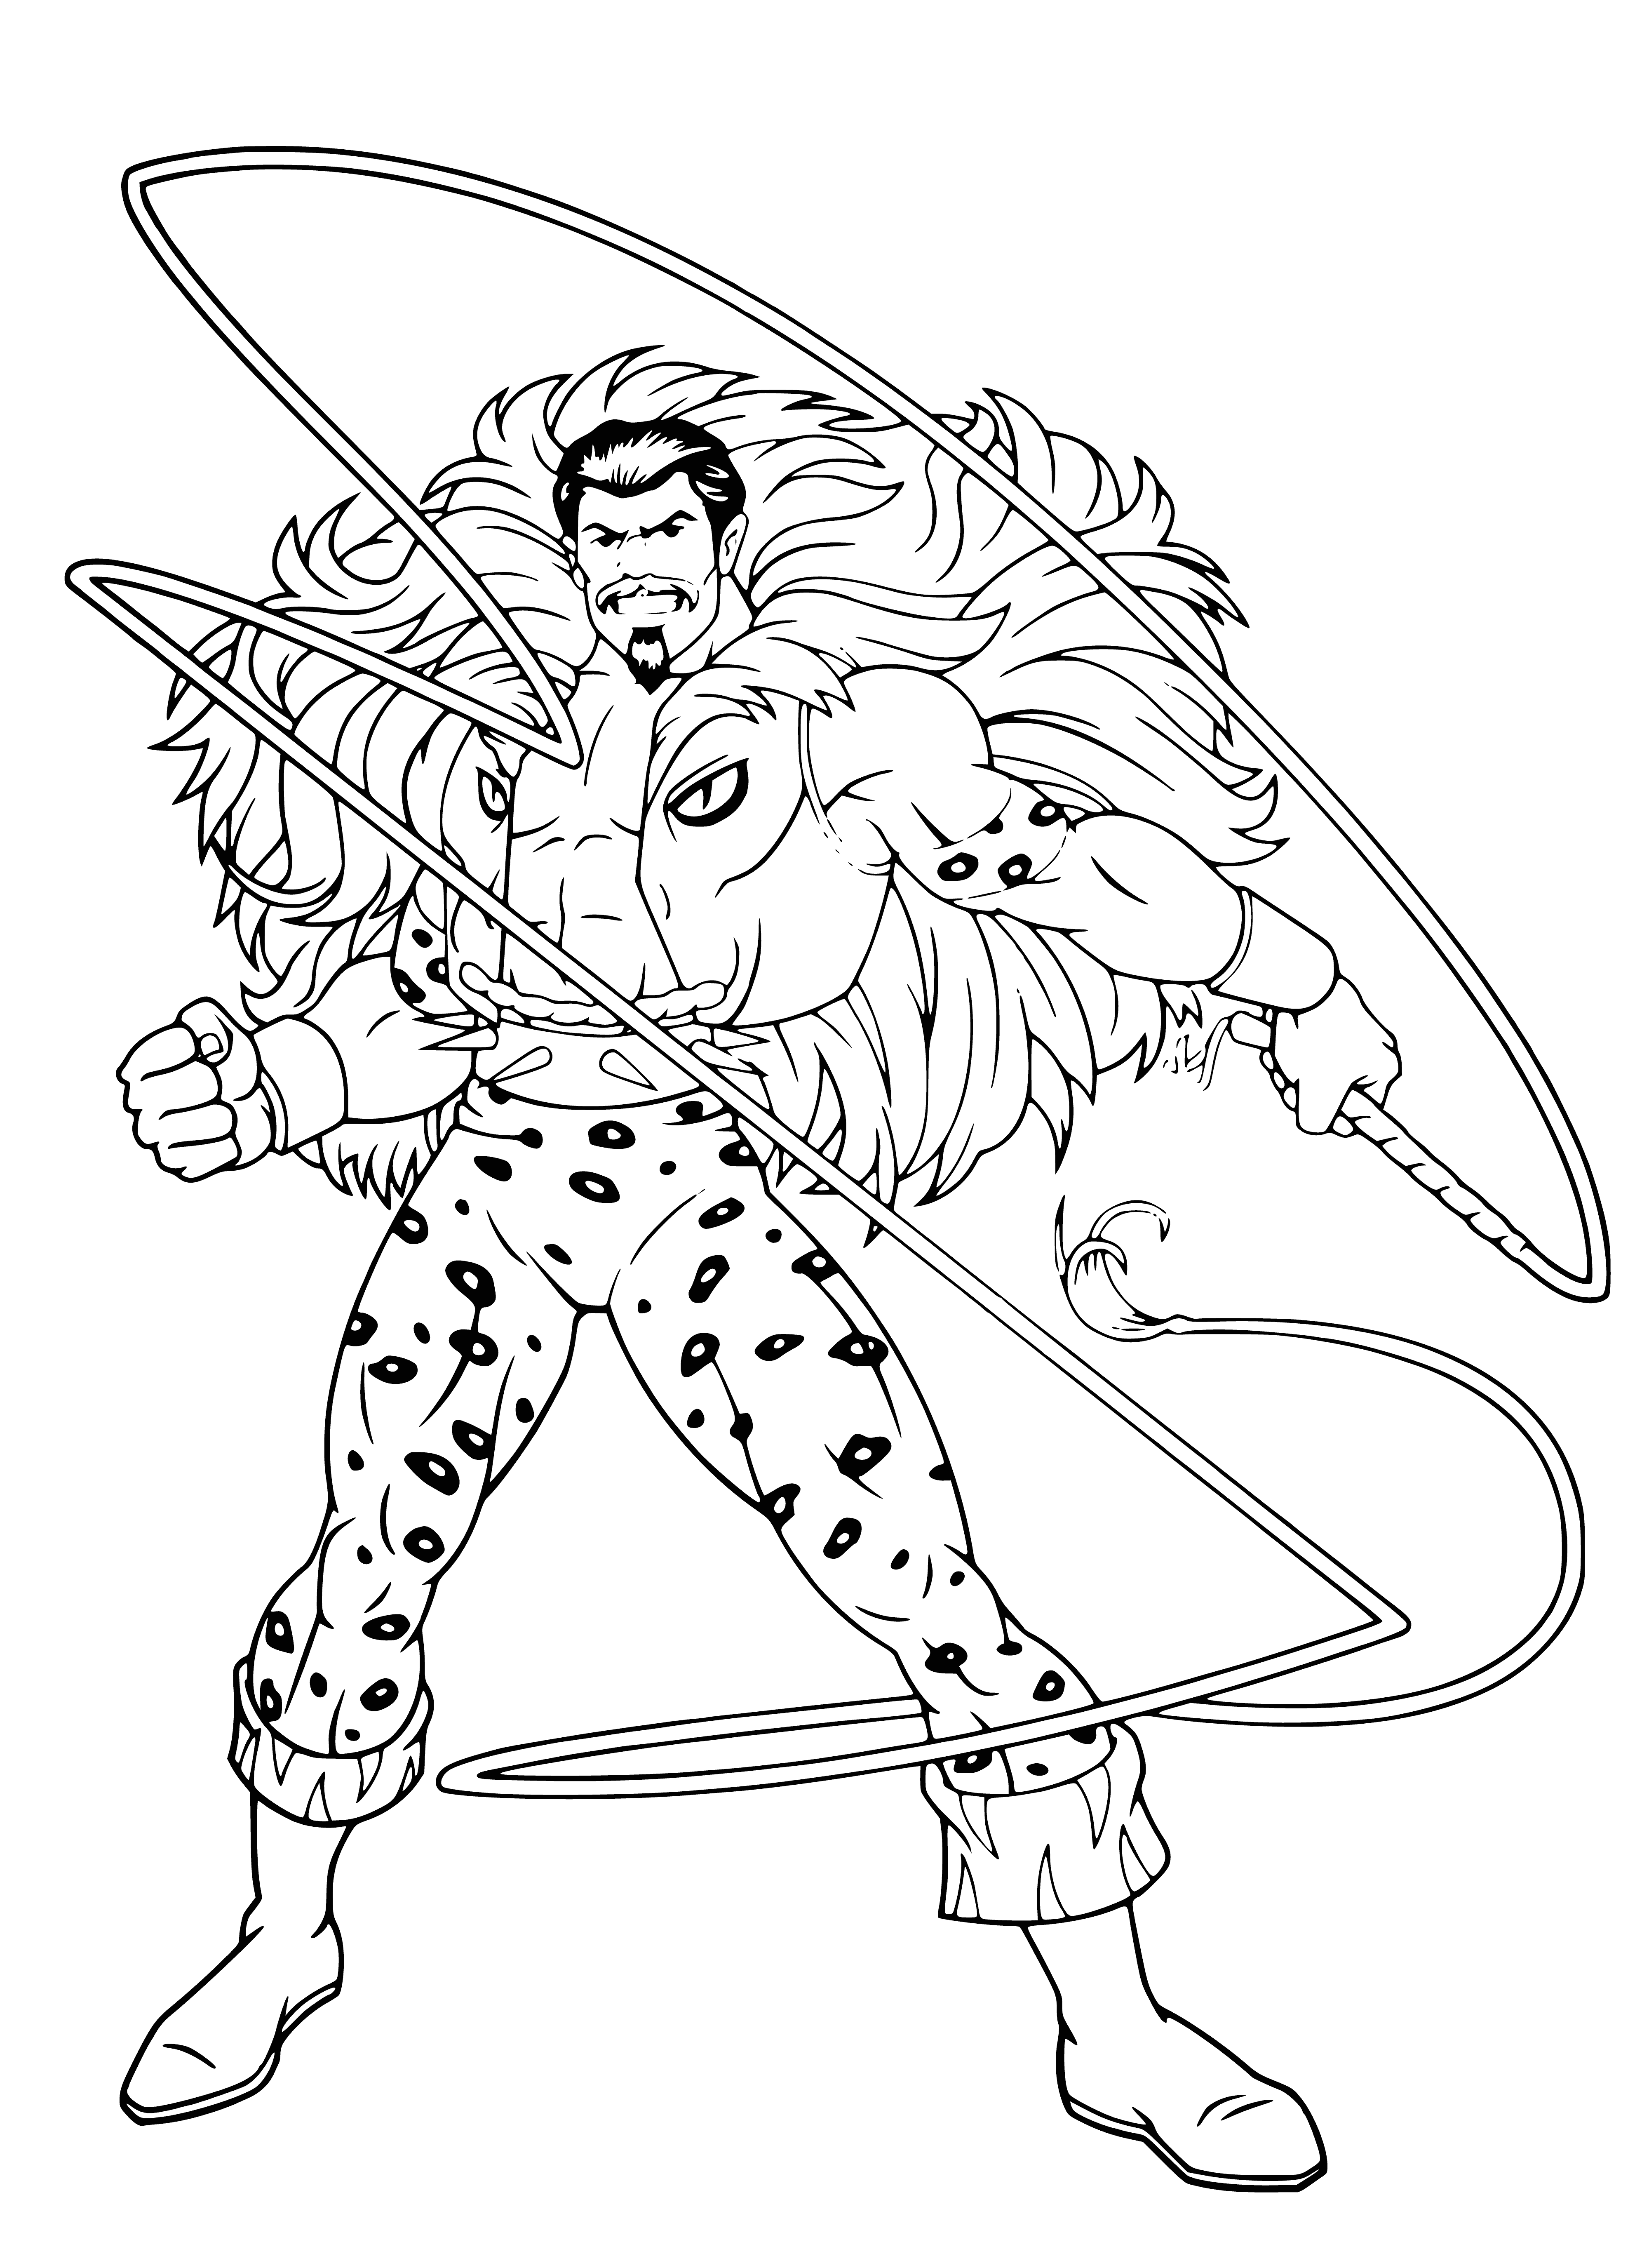 coloring page: He's bald with a scar, green-clad, and holding a rifle. His left hand is bandaged and he has a sack over his shoulder. Mean look on his face.